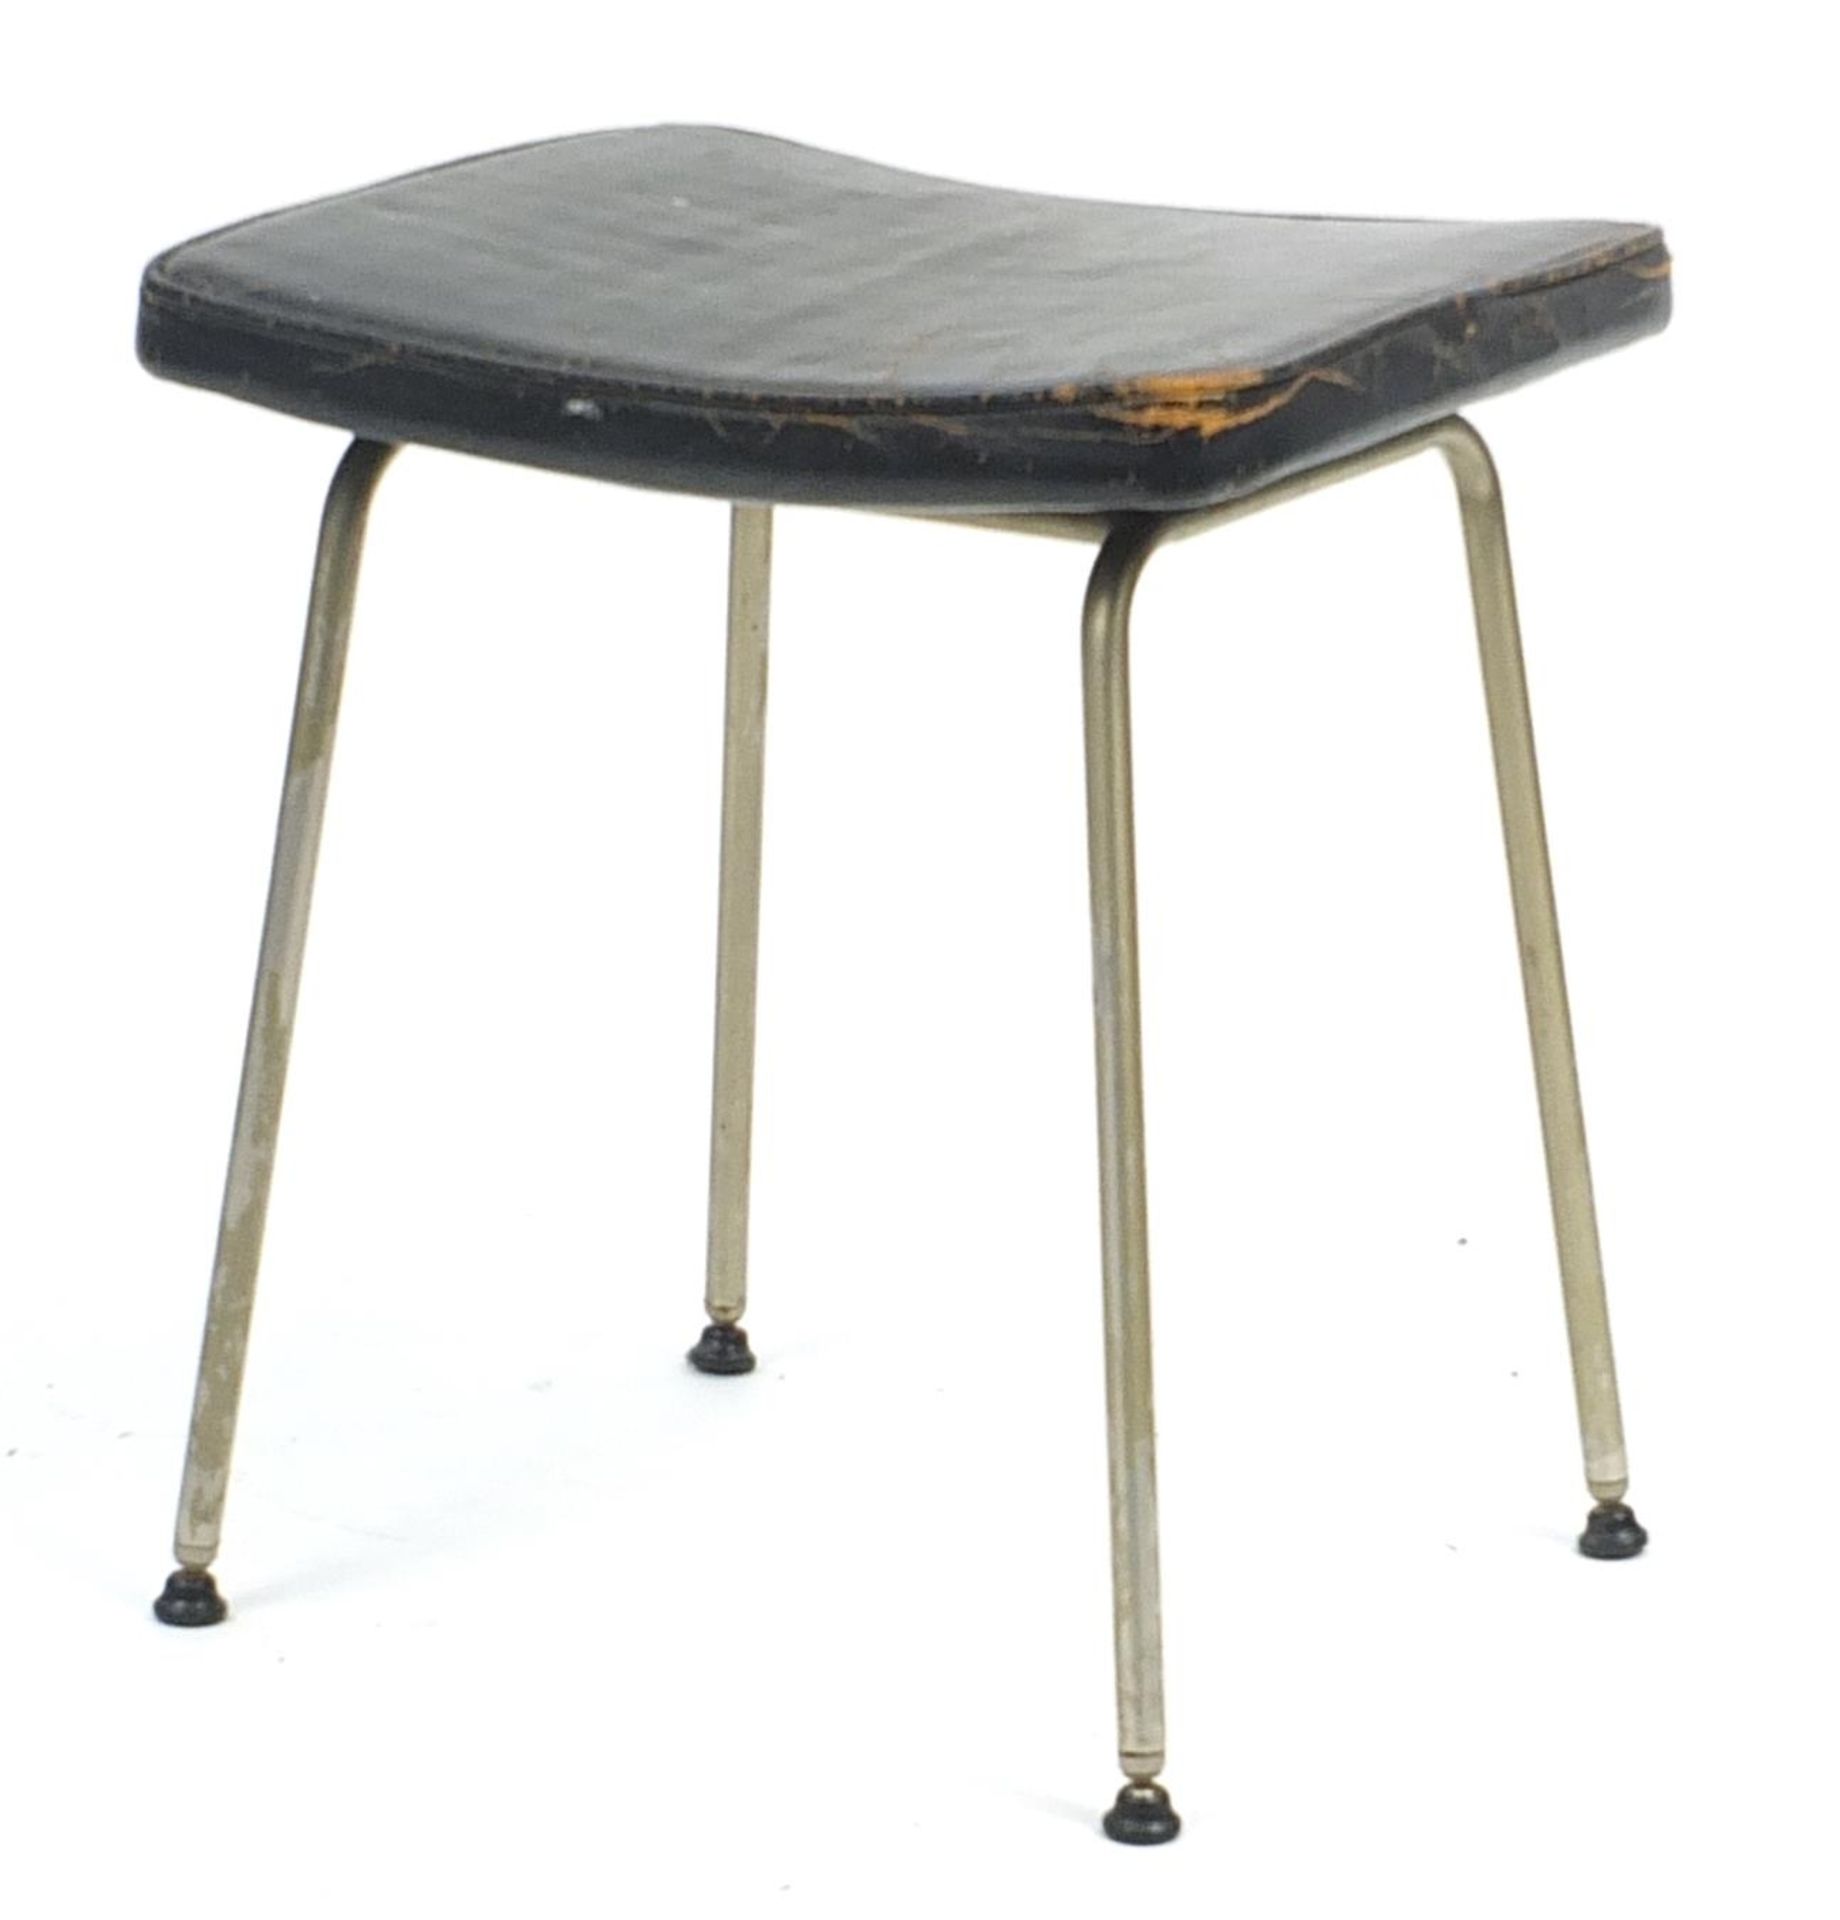 Stag, vintage industrial stool with leather seat, 44cm high